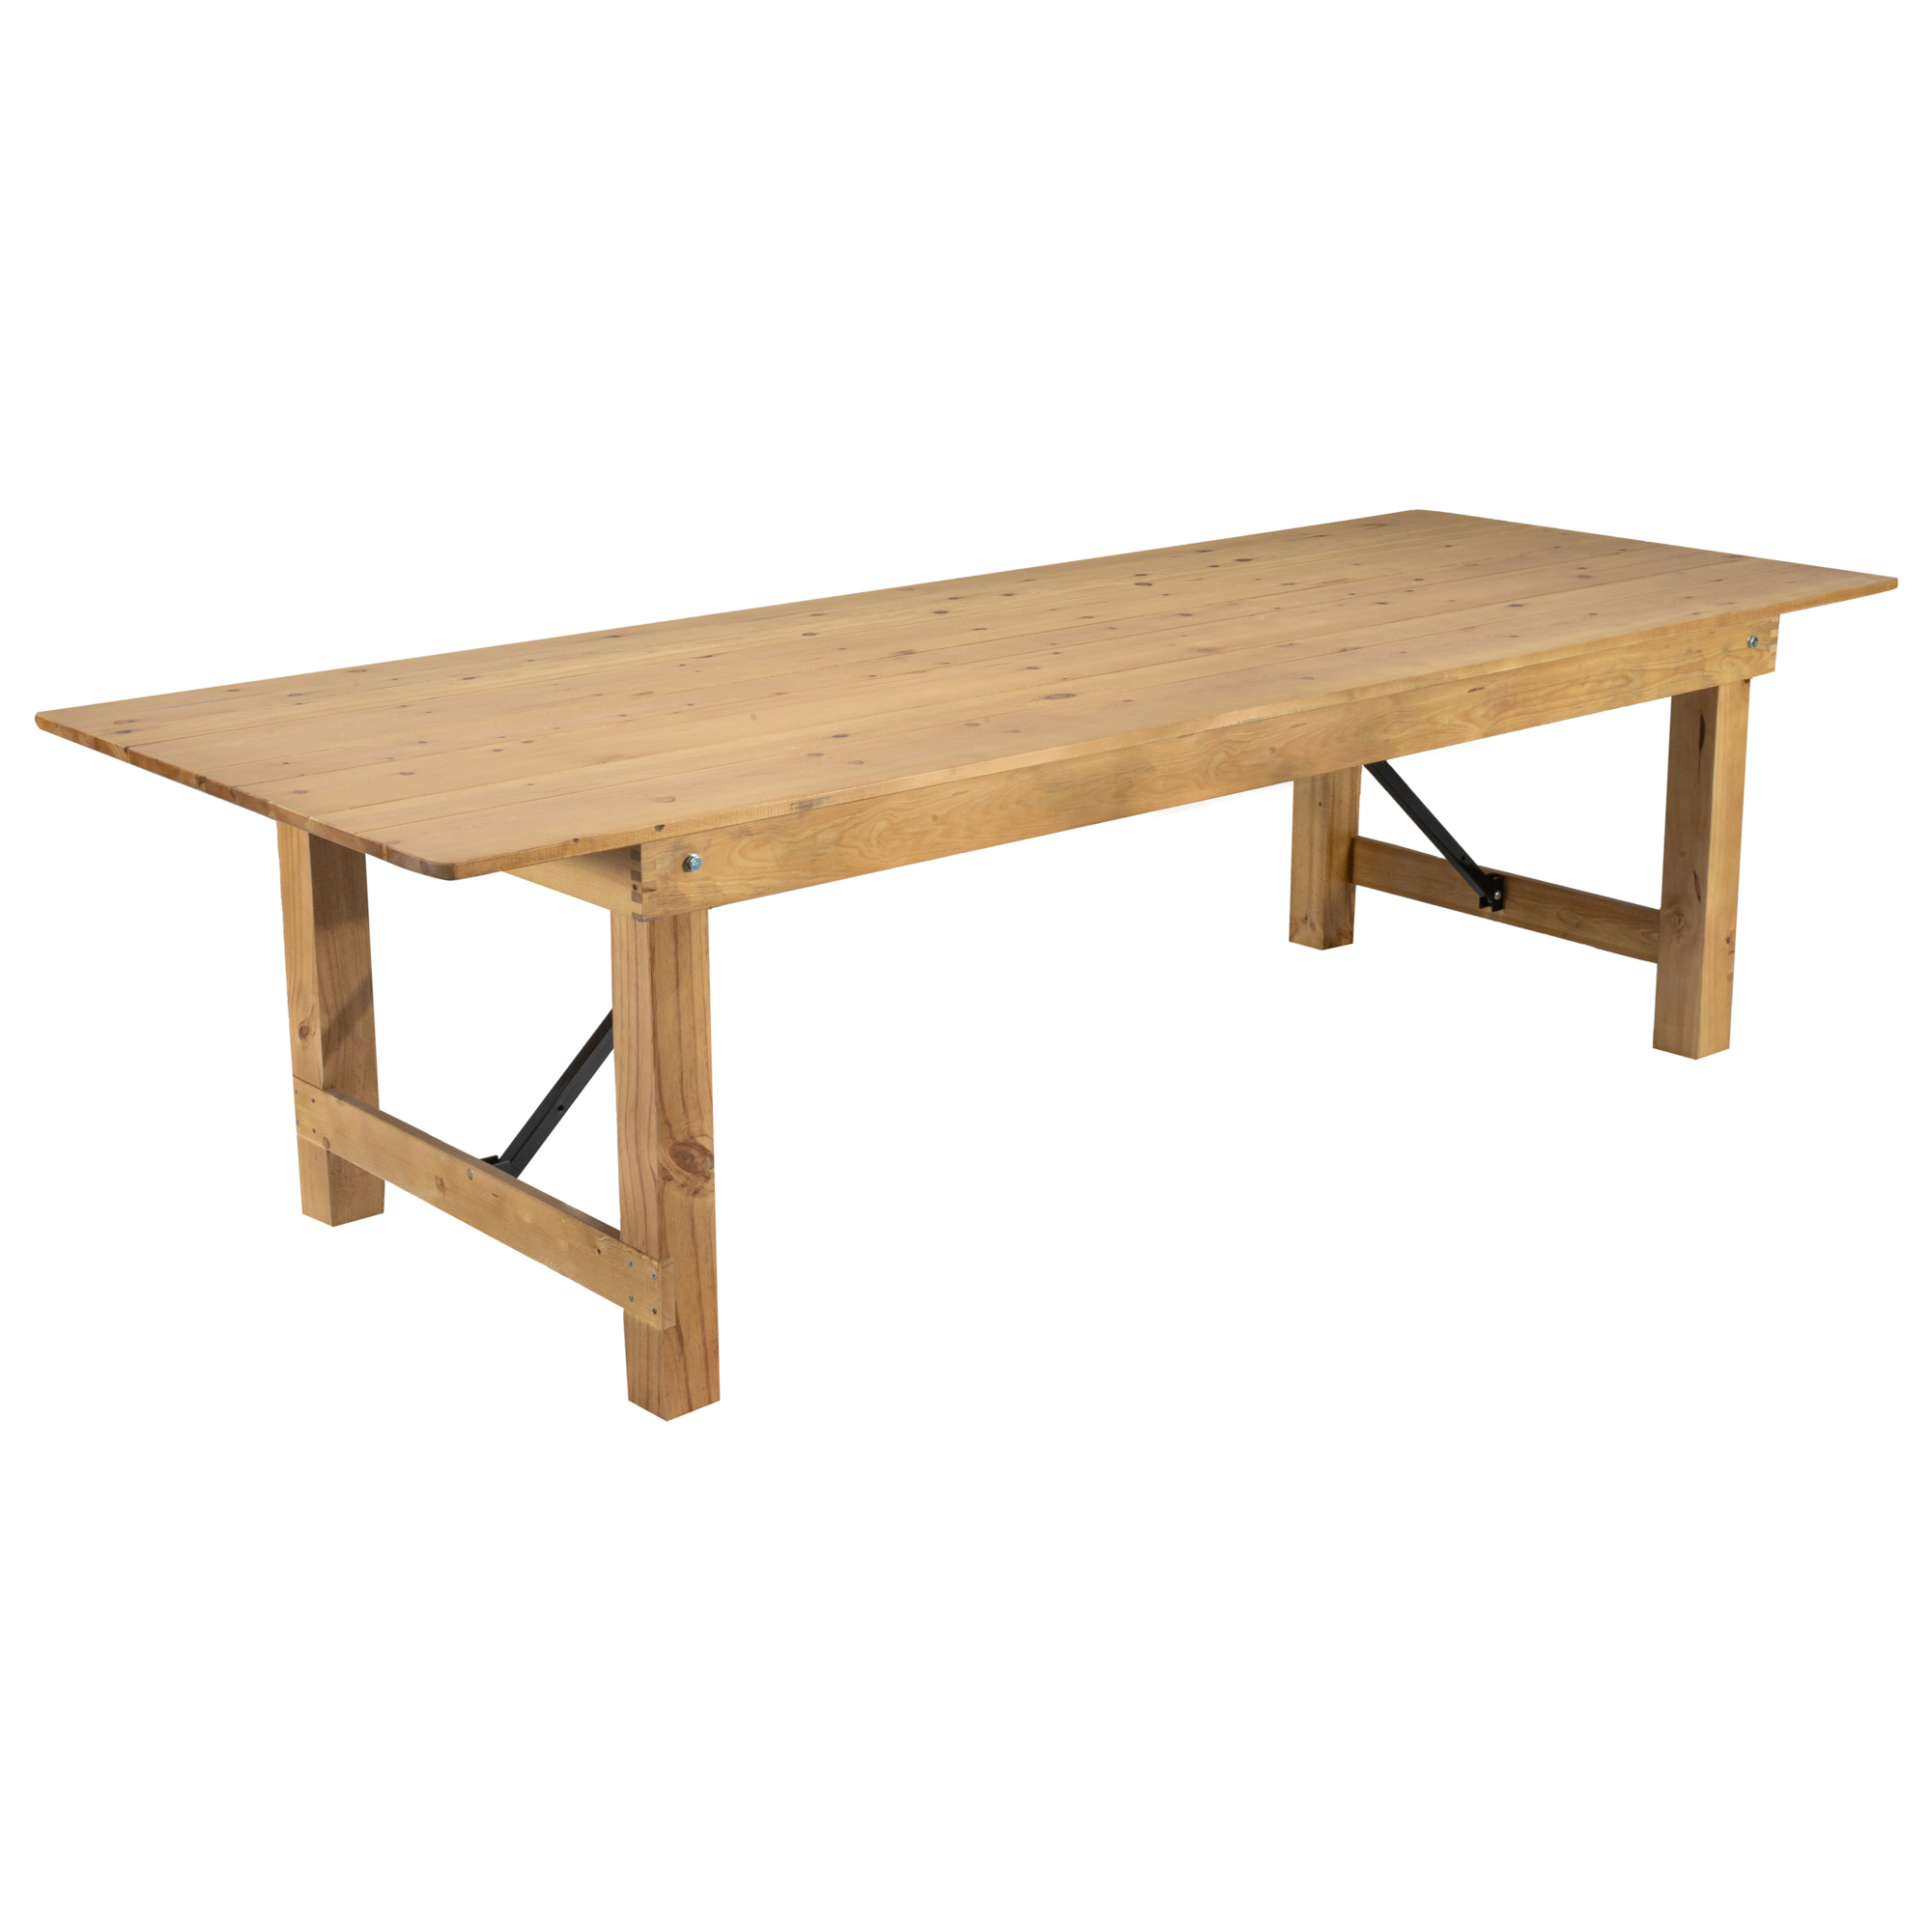 Flash Furniture, 9ft. x 40Inch Natural Solid Pine Folding Farm Table, Height 30 in, Width 40 in, Length 108 in, Model XAF108X40LN